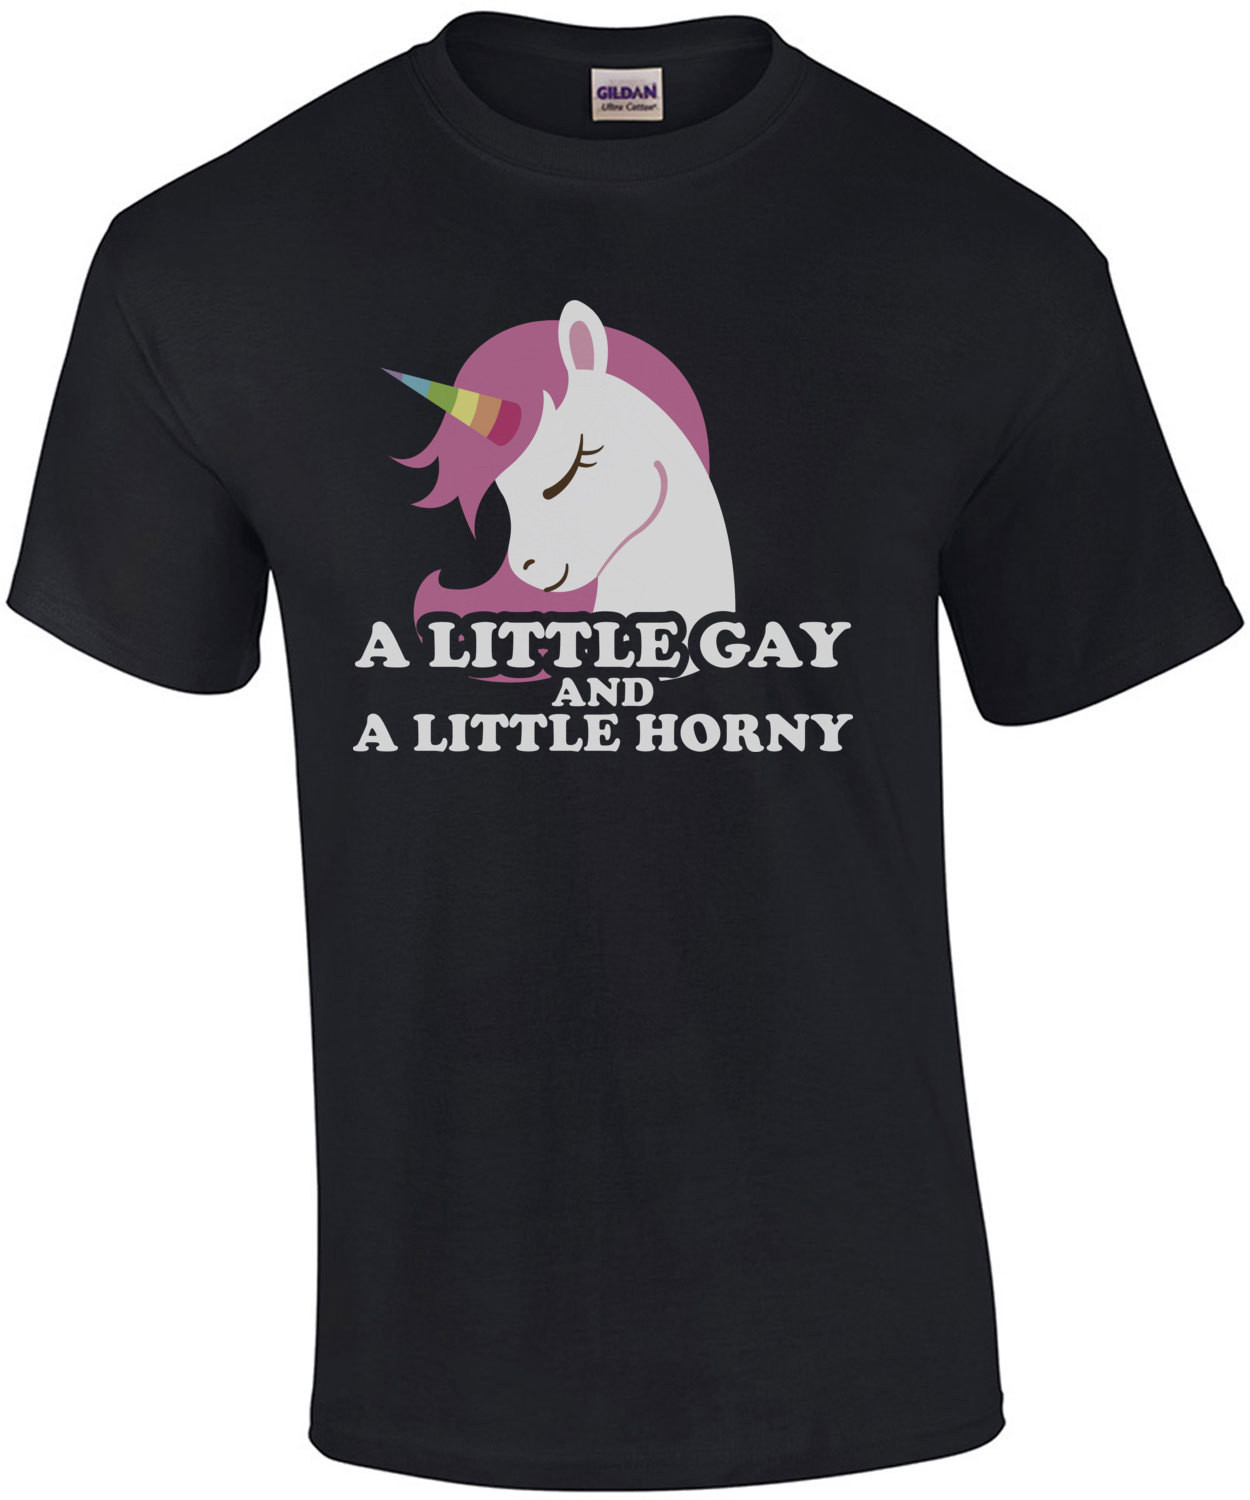 A little gay and a little horny - Gay Pride T-Shirt